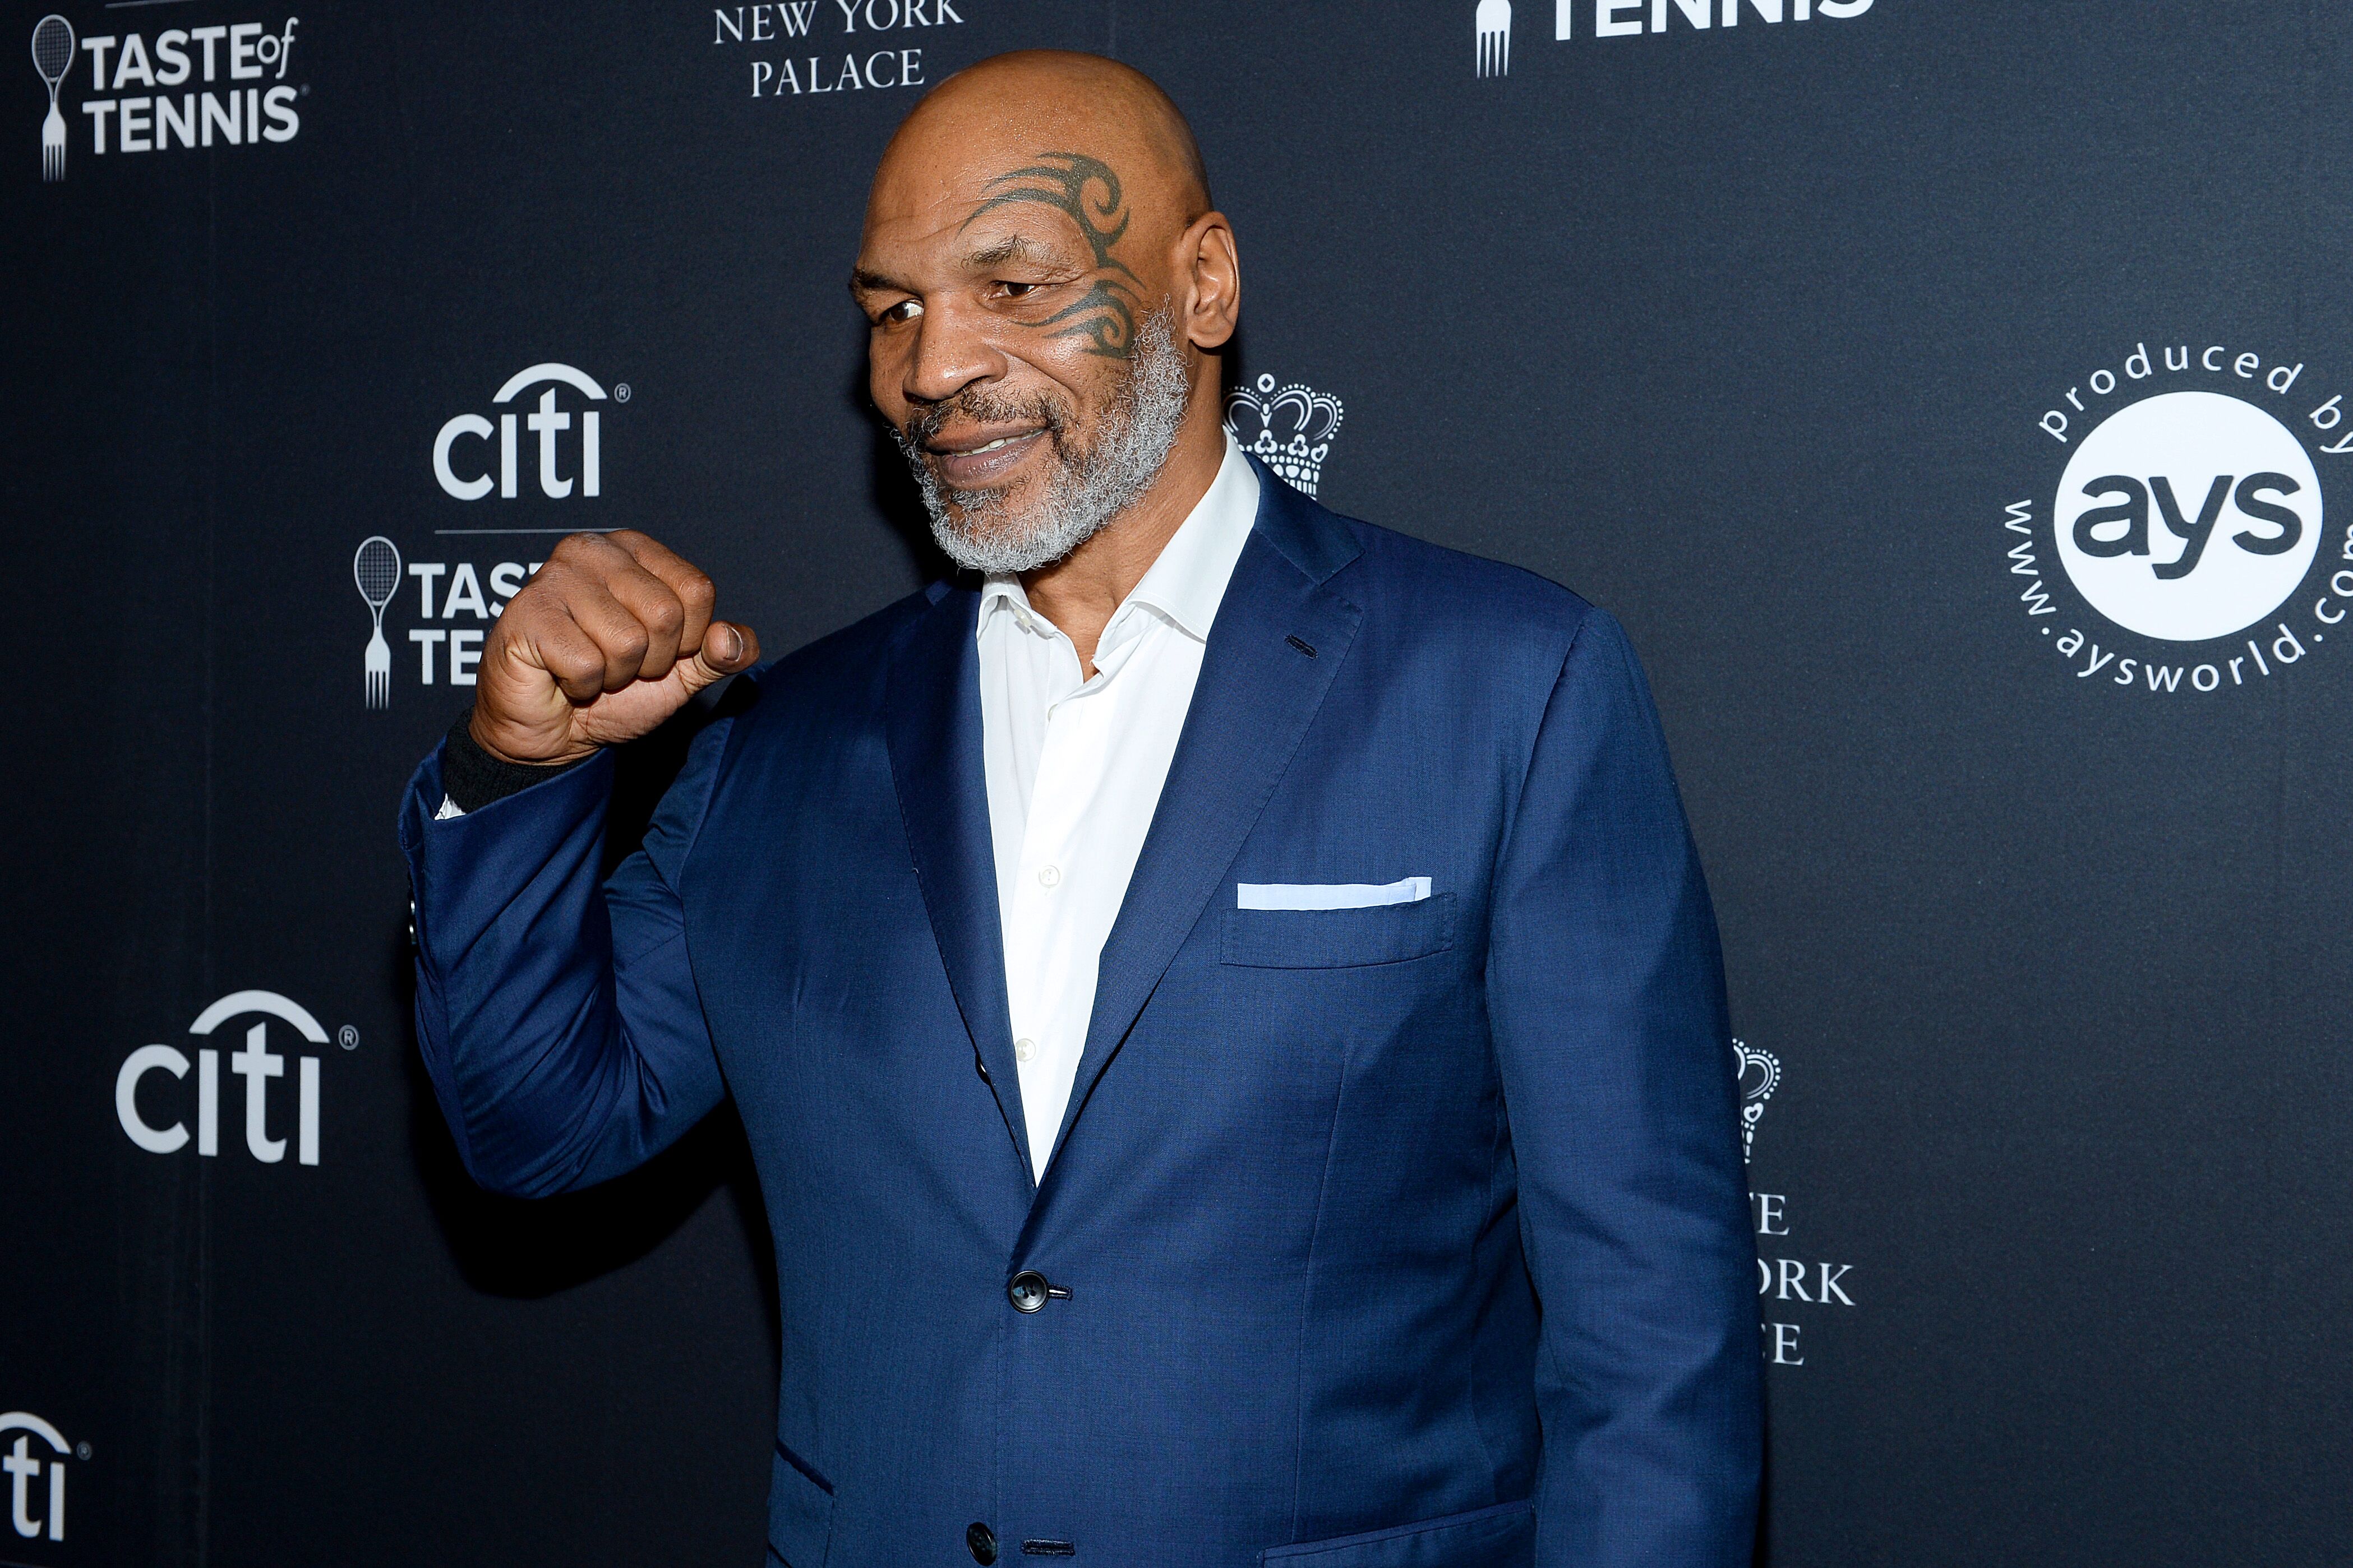 Mike Tyson attending the Citi Taste of Tennis in August 2019. | Photo: Getty Images